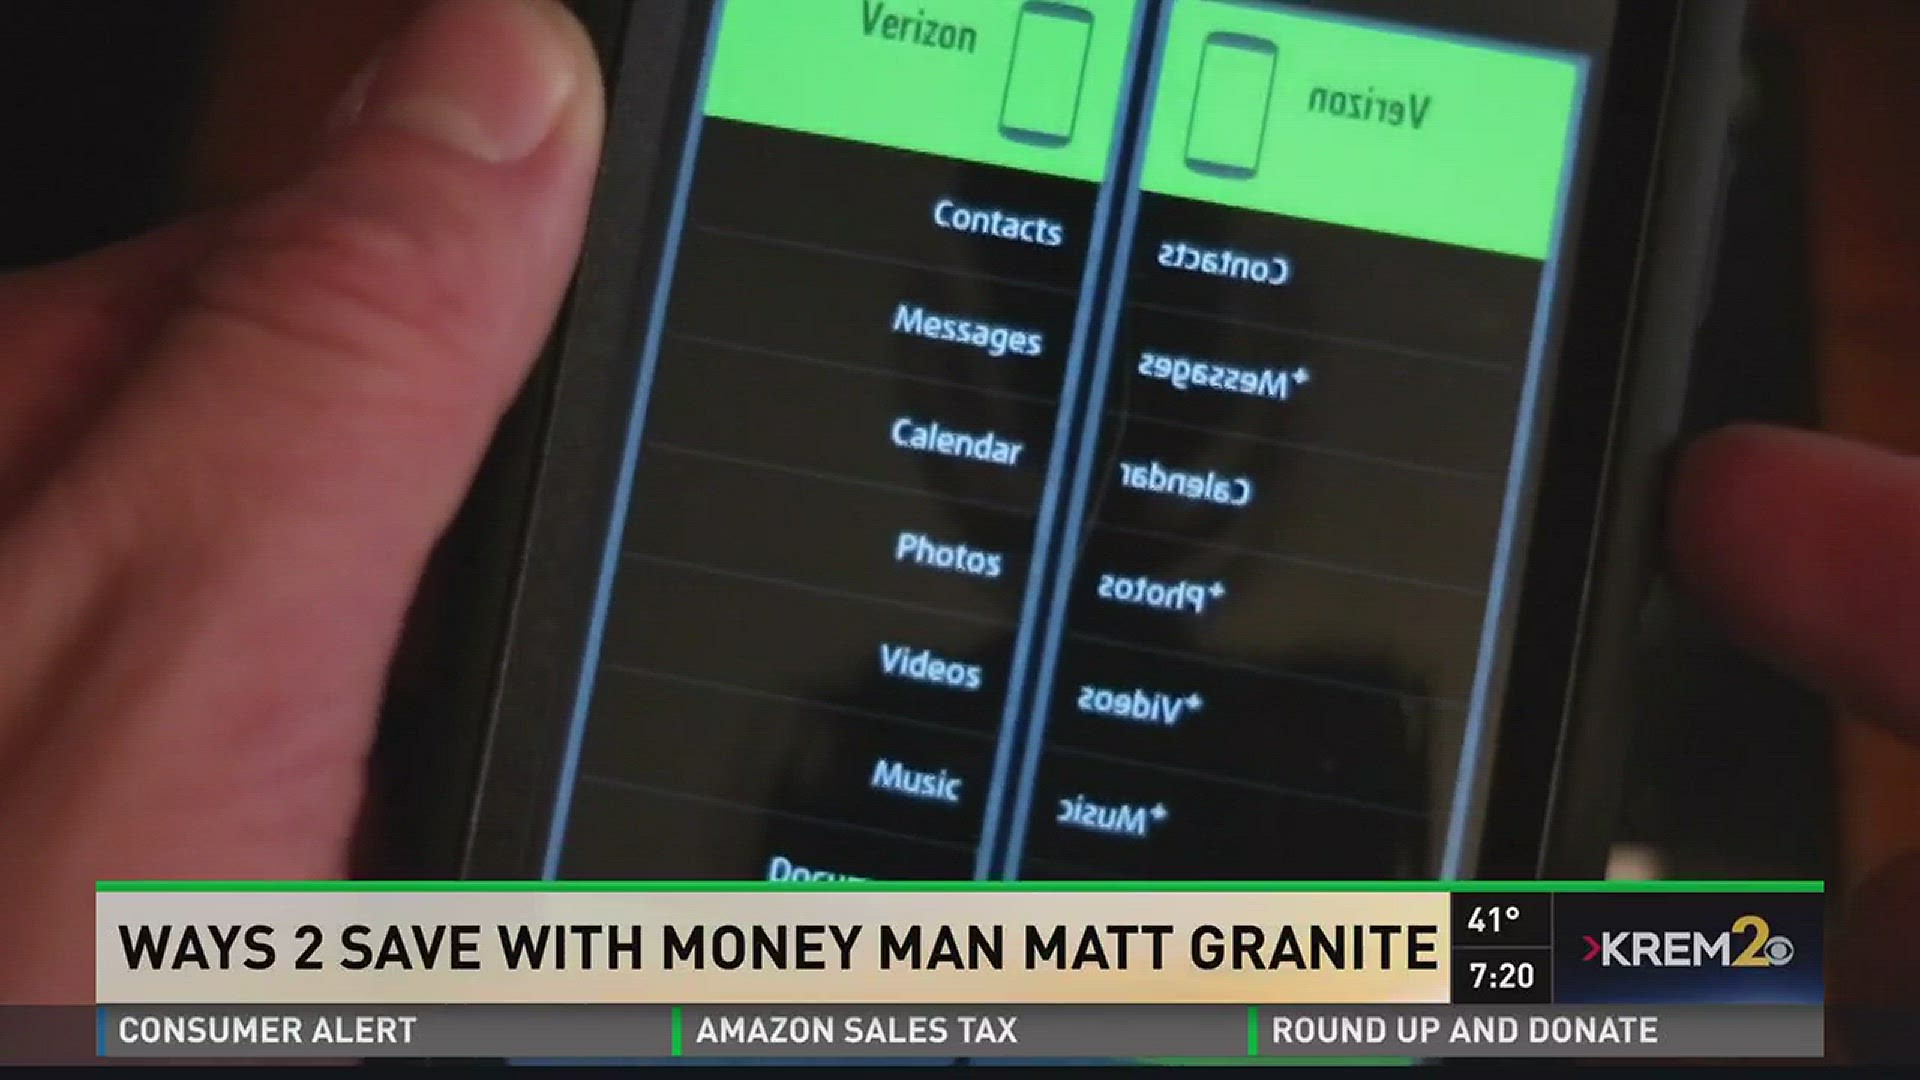 The days of paying for cloud storage stop right now. Money Man matt granite has a solution to save your smartphone!